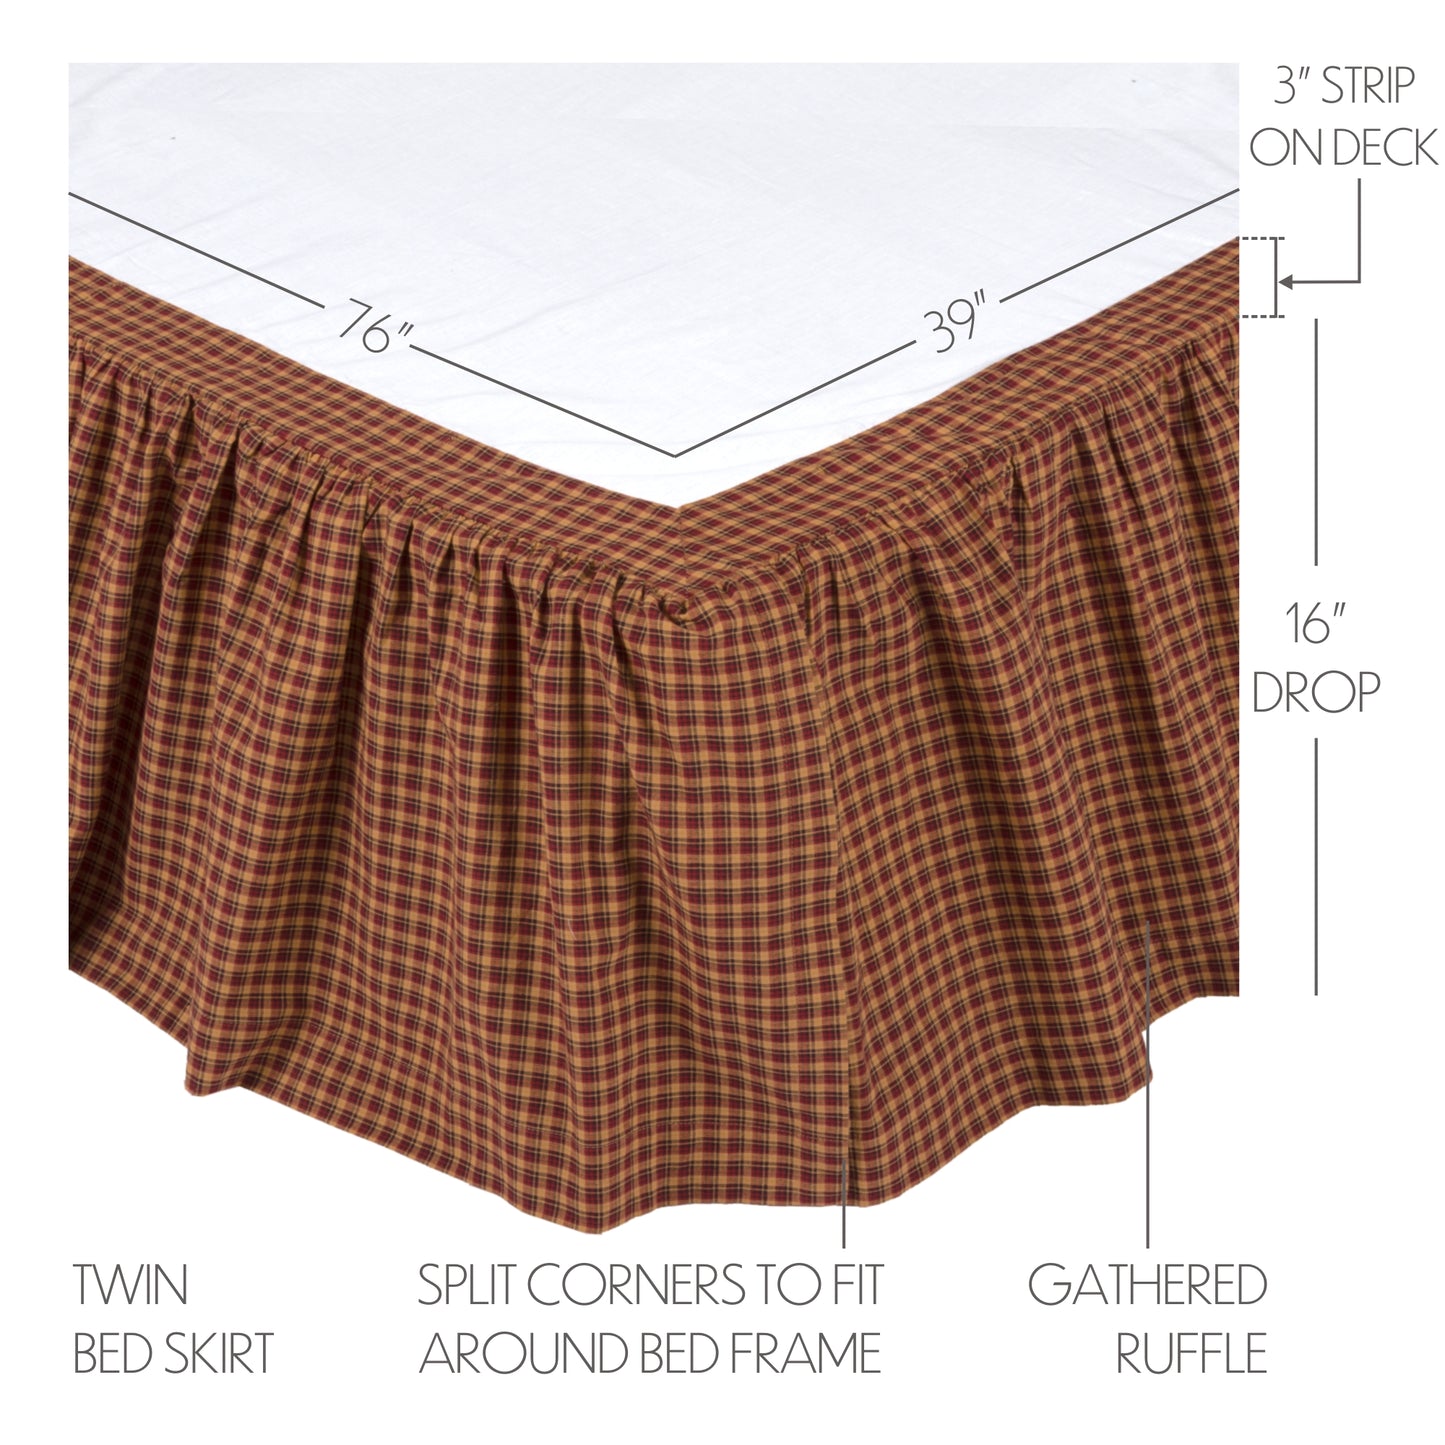 10449-Patriotic-Patch-Twin-Bed-Skirt-39x76x16-image-1